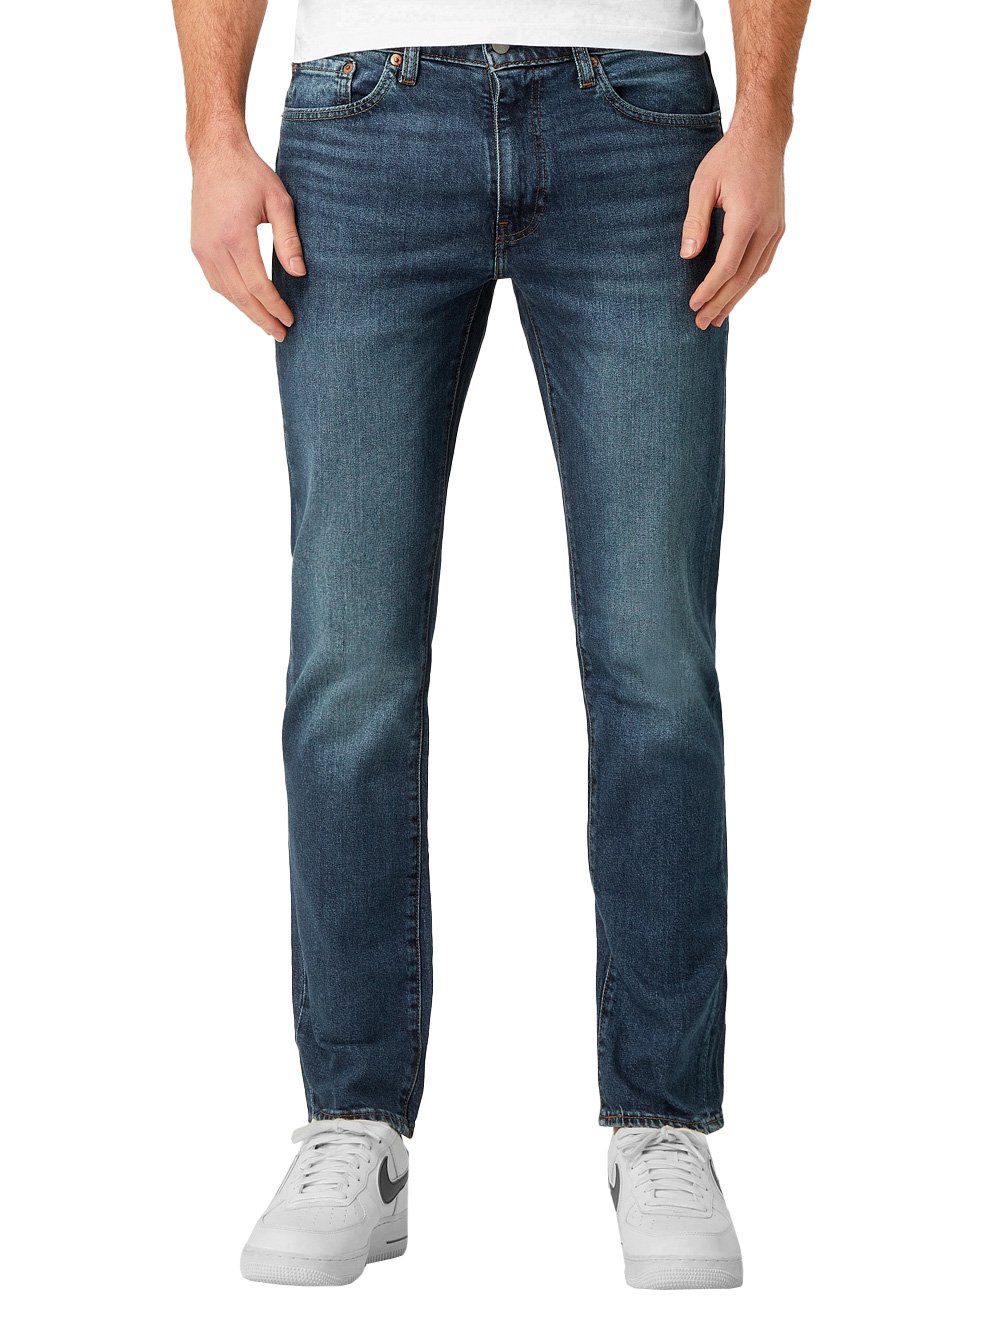 Levis - Outlet Masculino